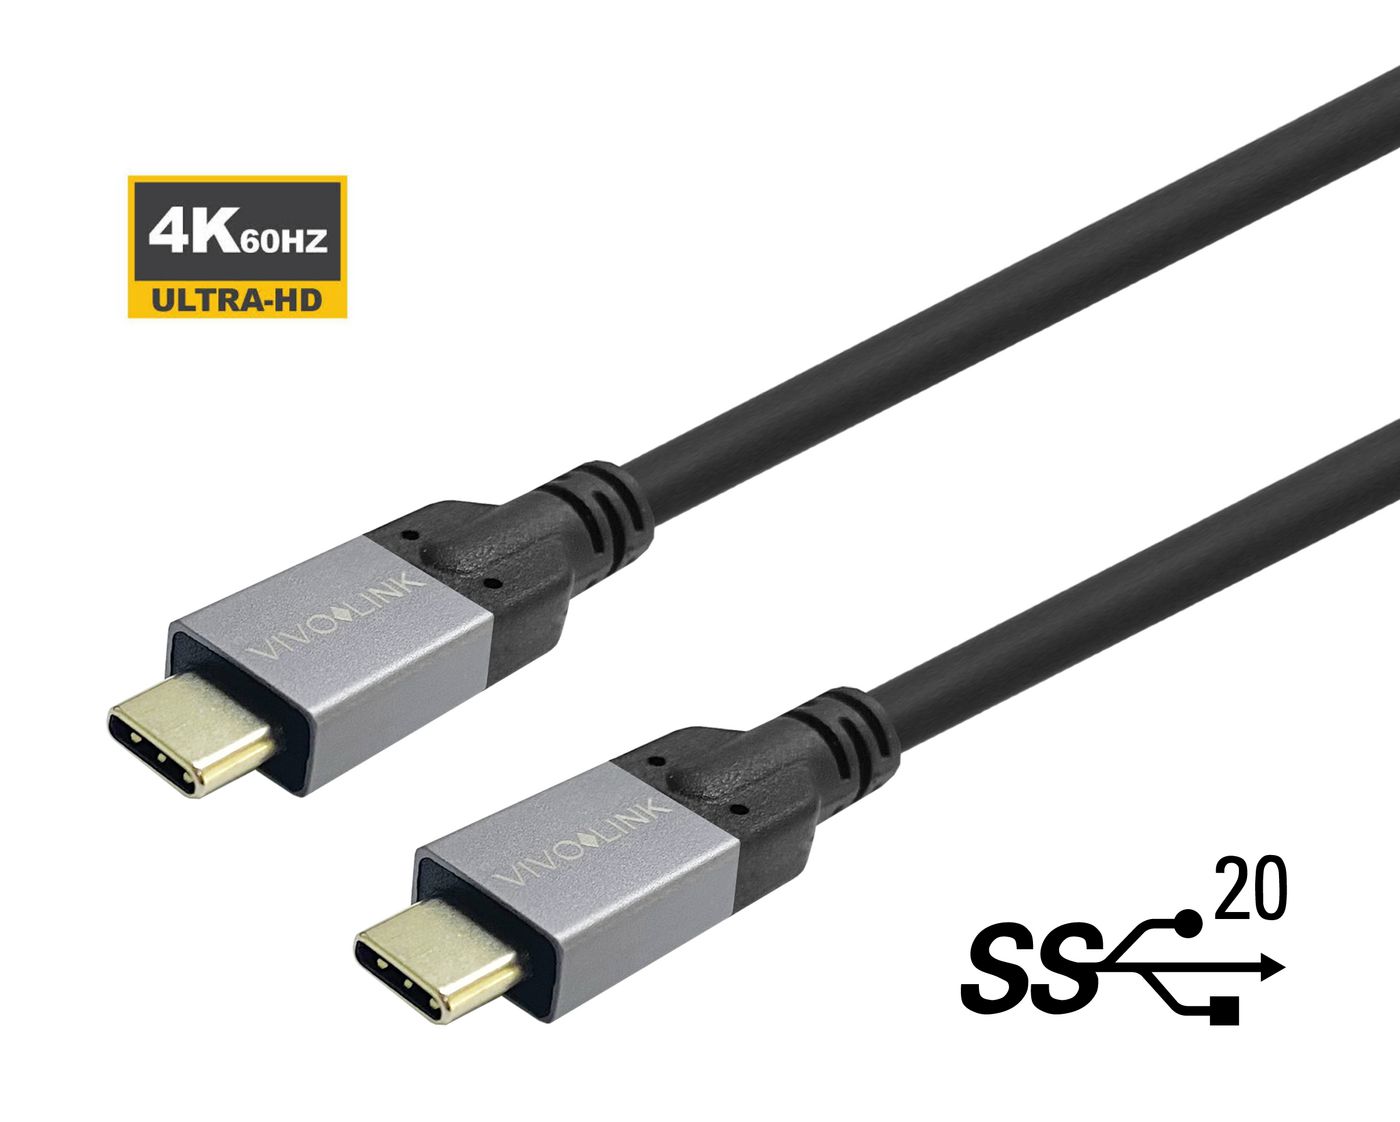 EET USB-C to Cable 3m Supports 20 Gbps data - Kabel - Digital/Daten (PROUSBCMM3)